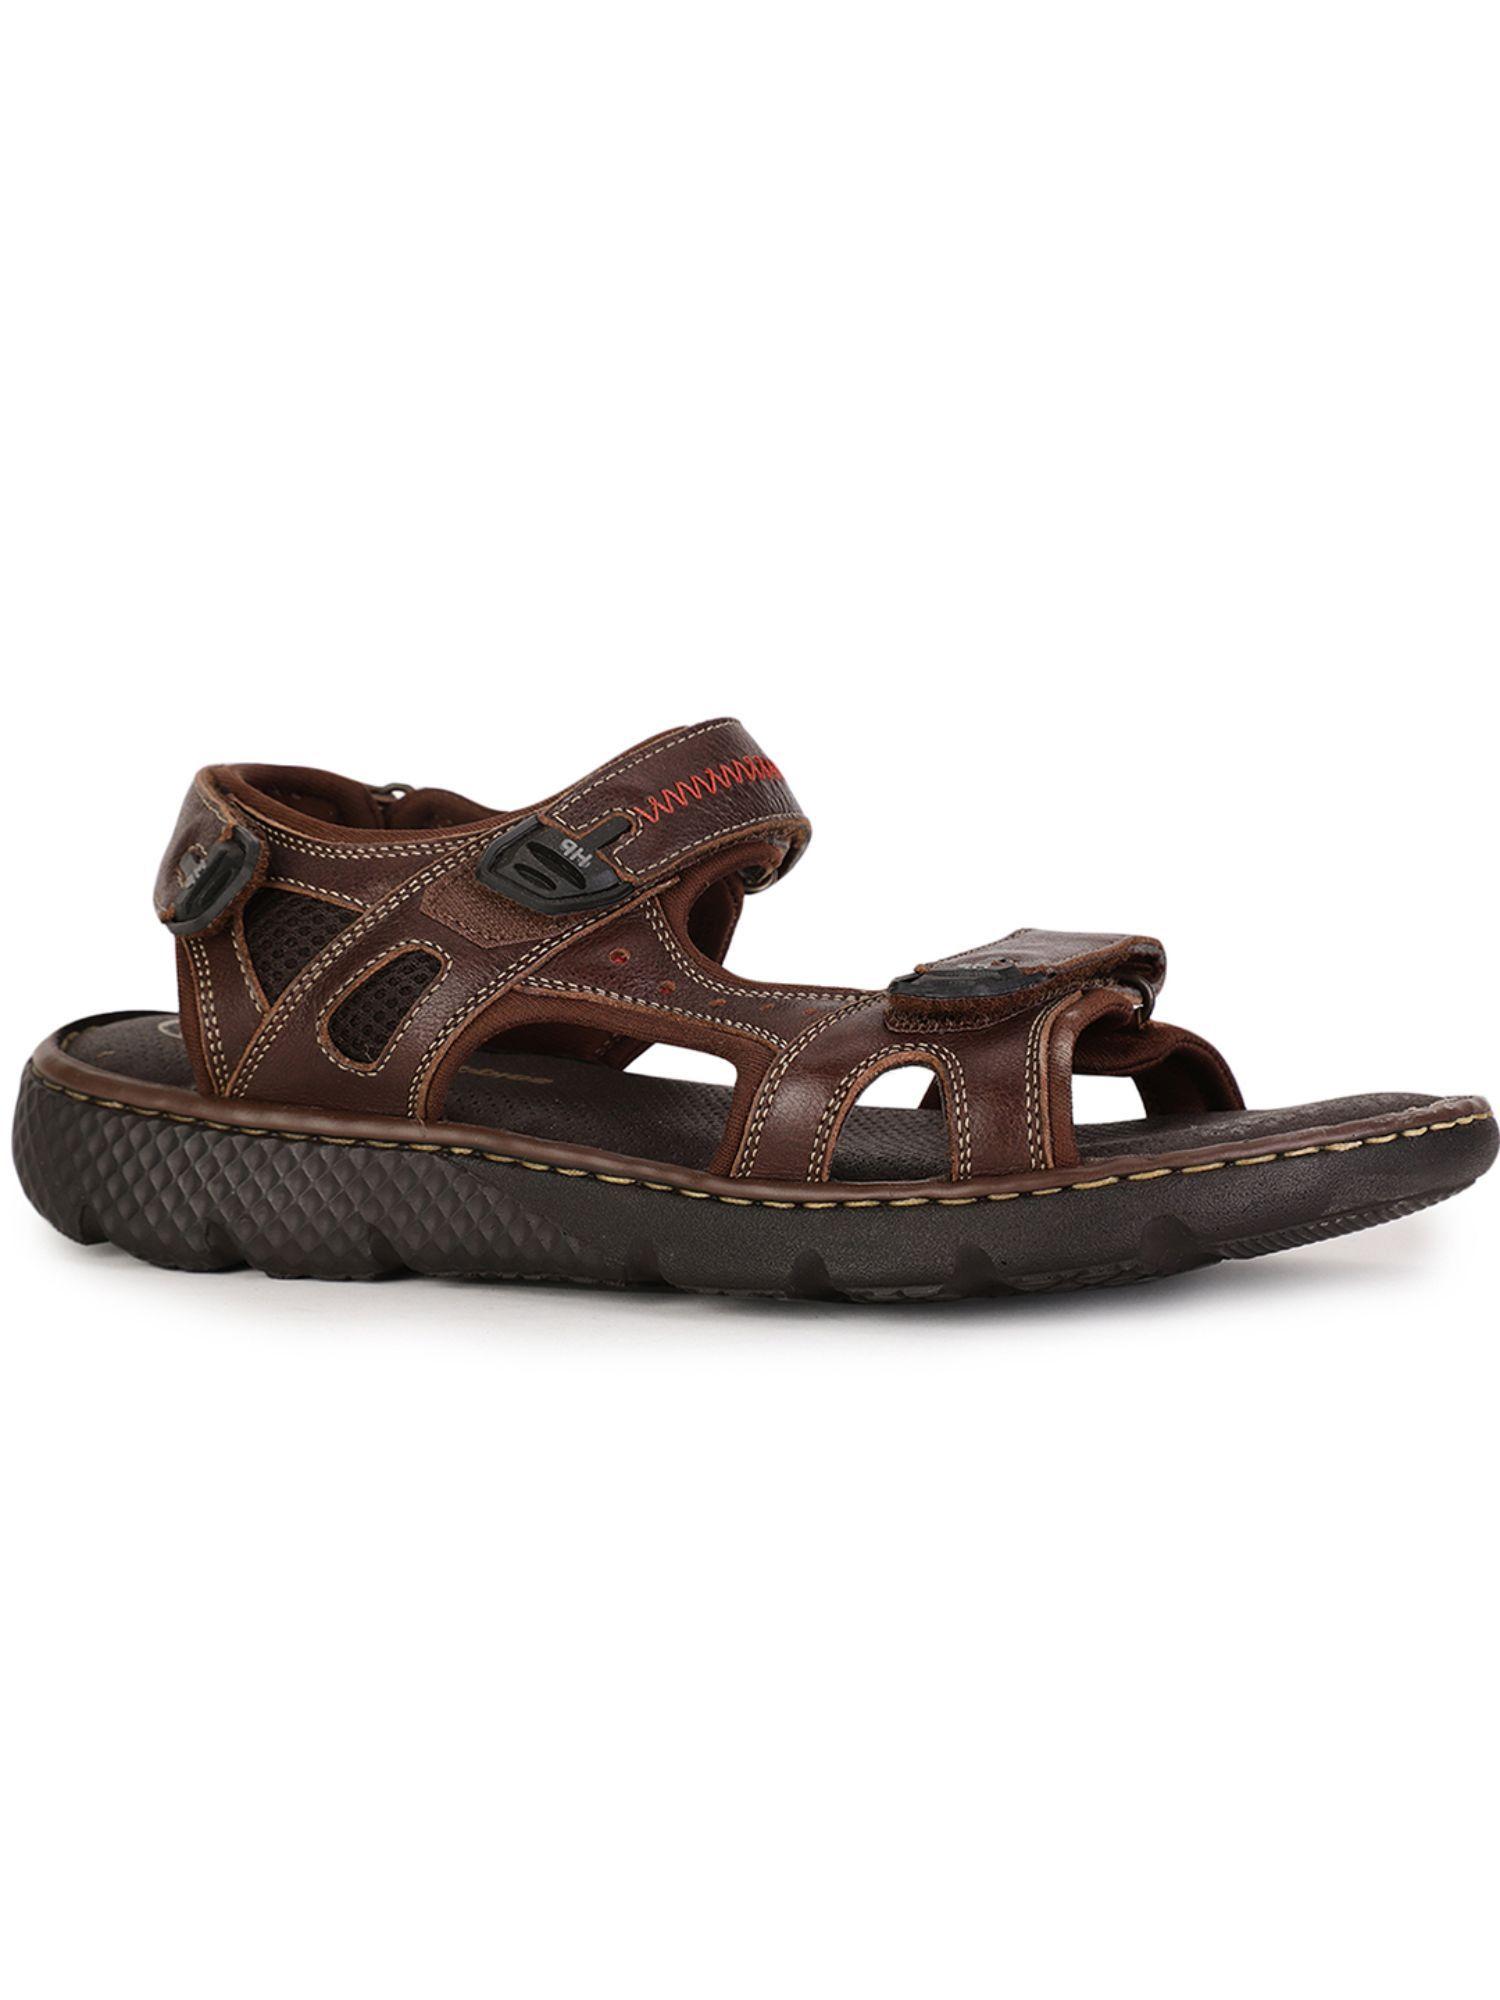 mens-brown-velcro-casual-sandals